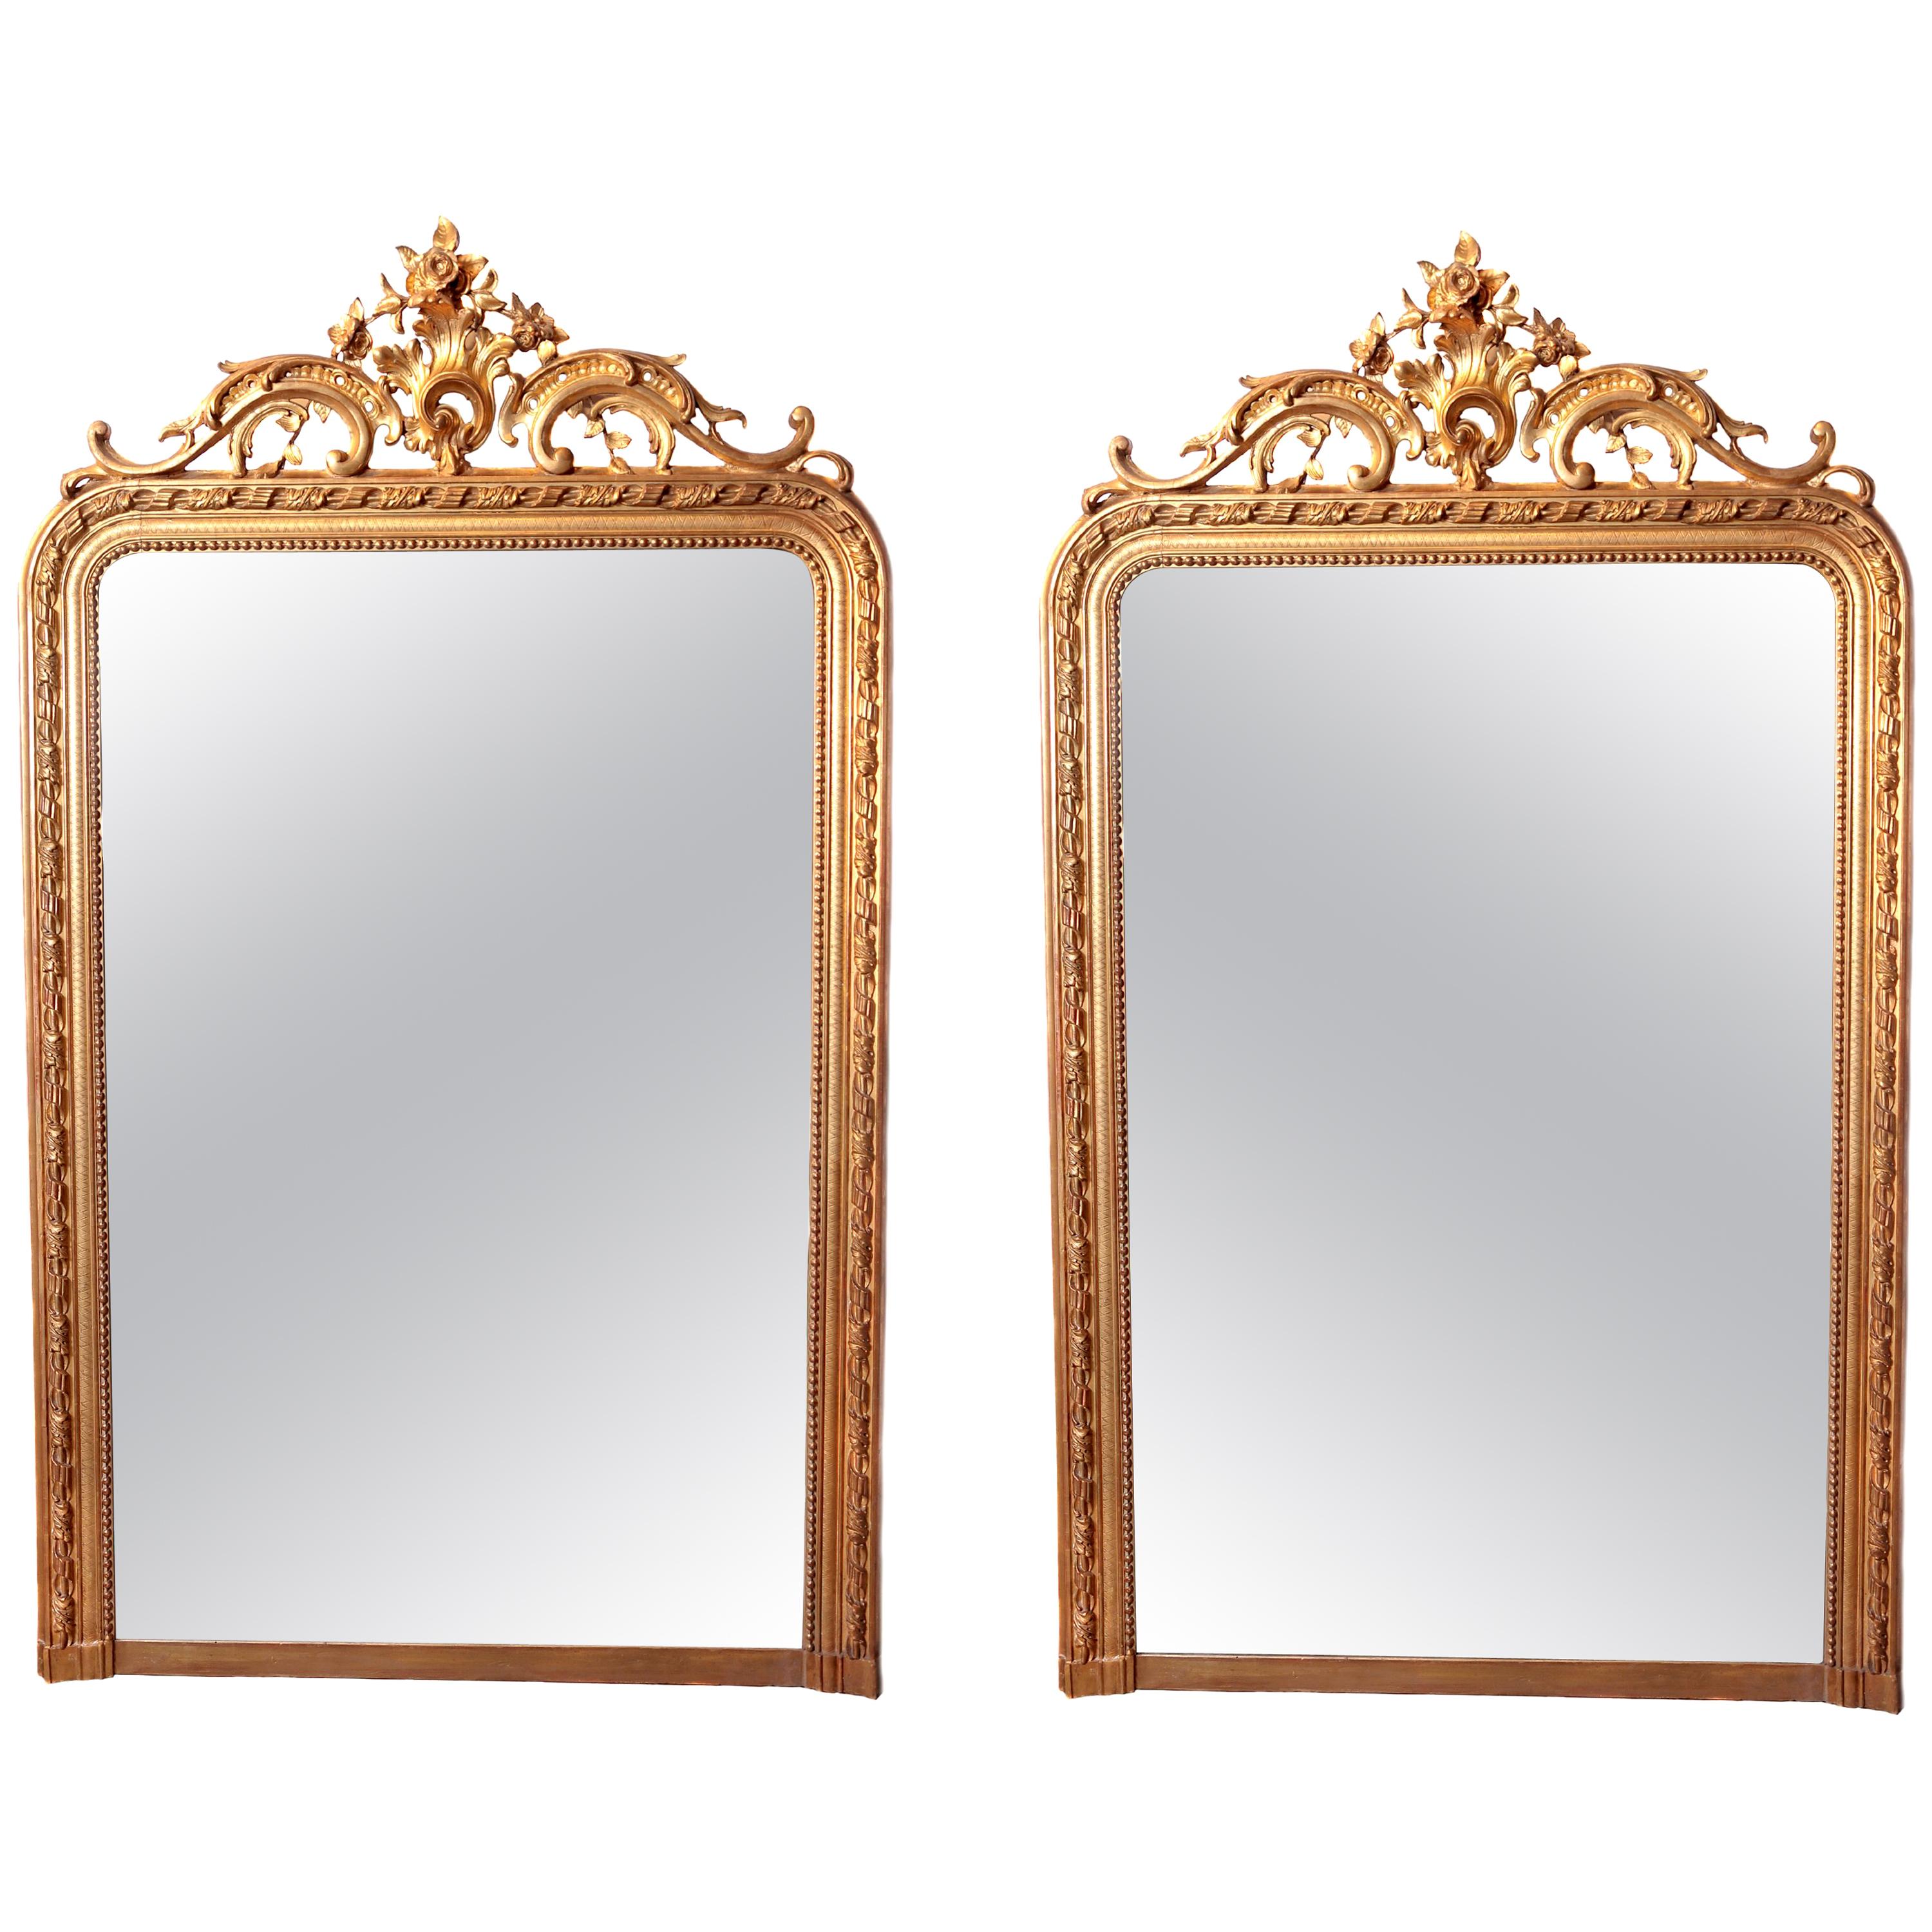 Pair of Large 19th Century French Louis XV Gilt Mirrors